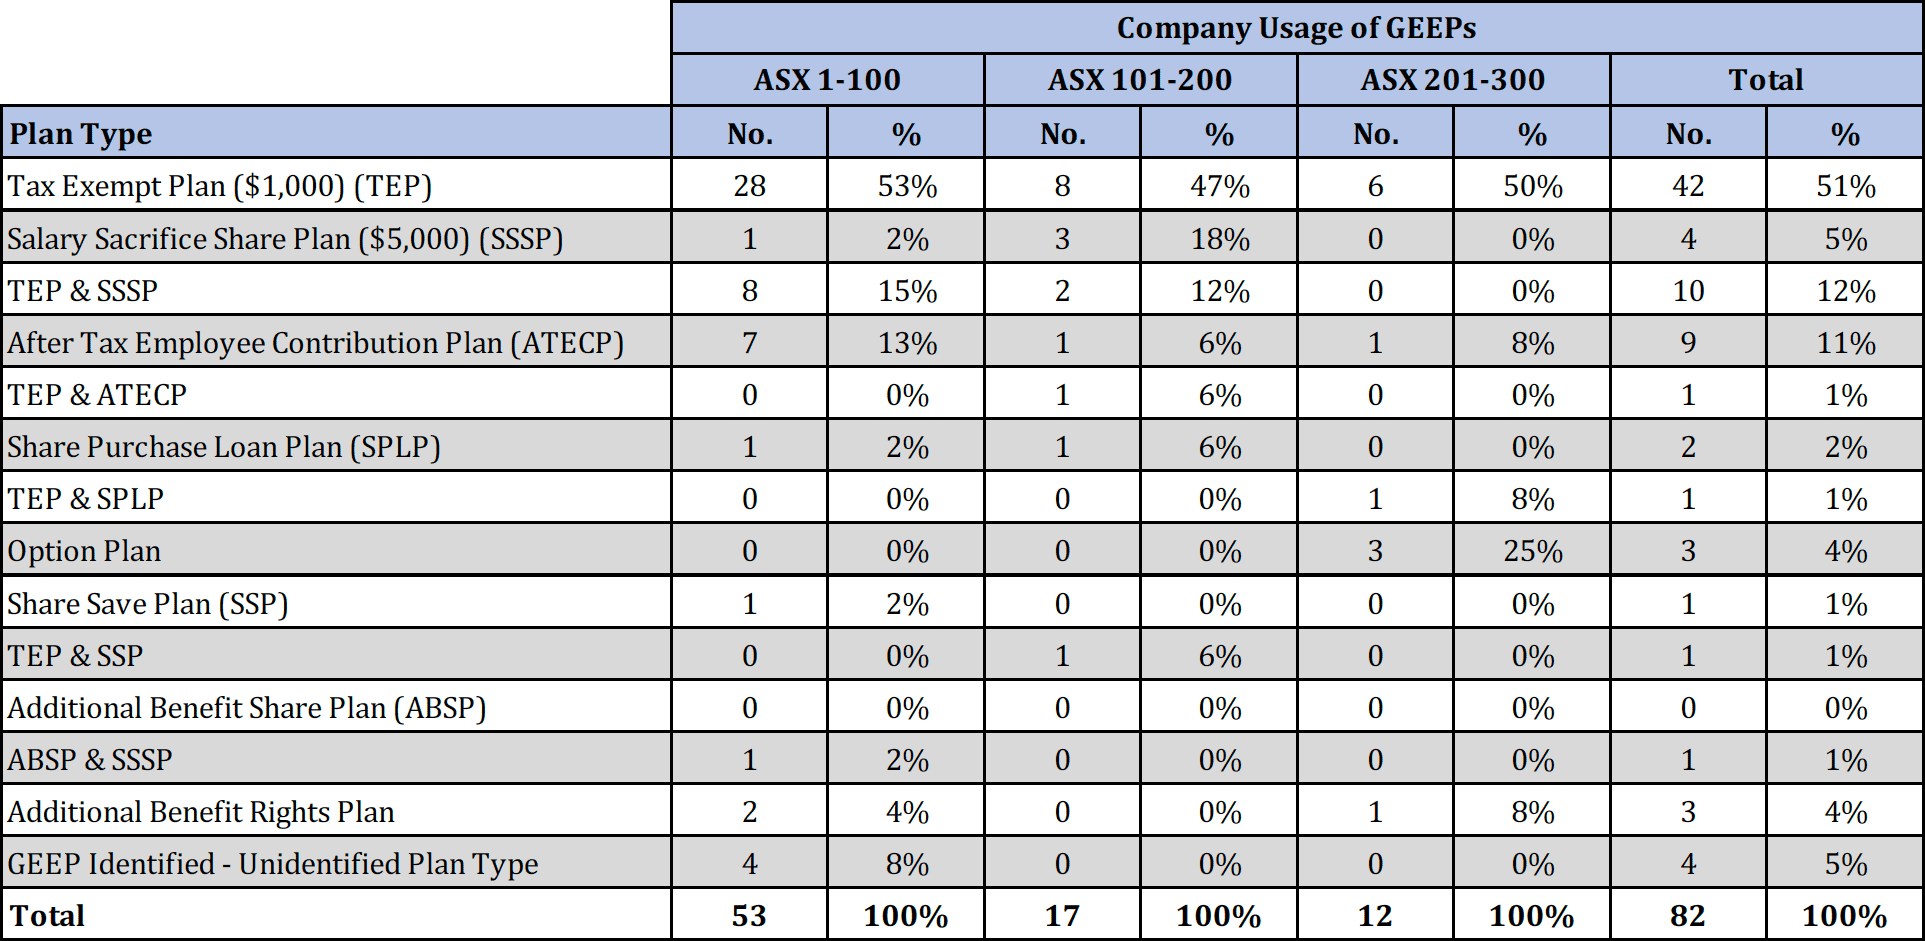 GEEP type usage by company for sectors and indices